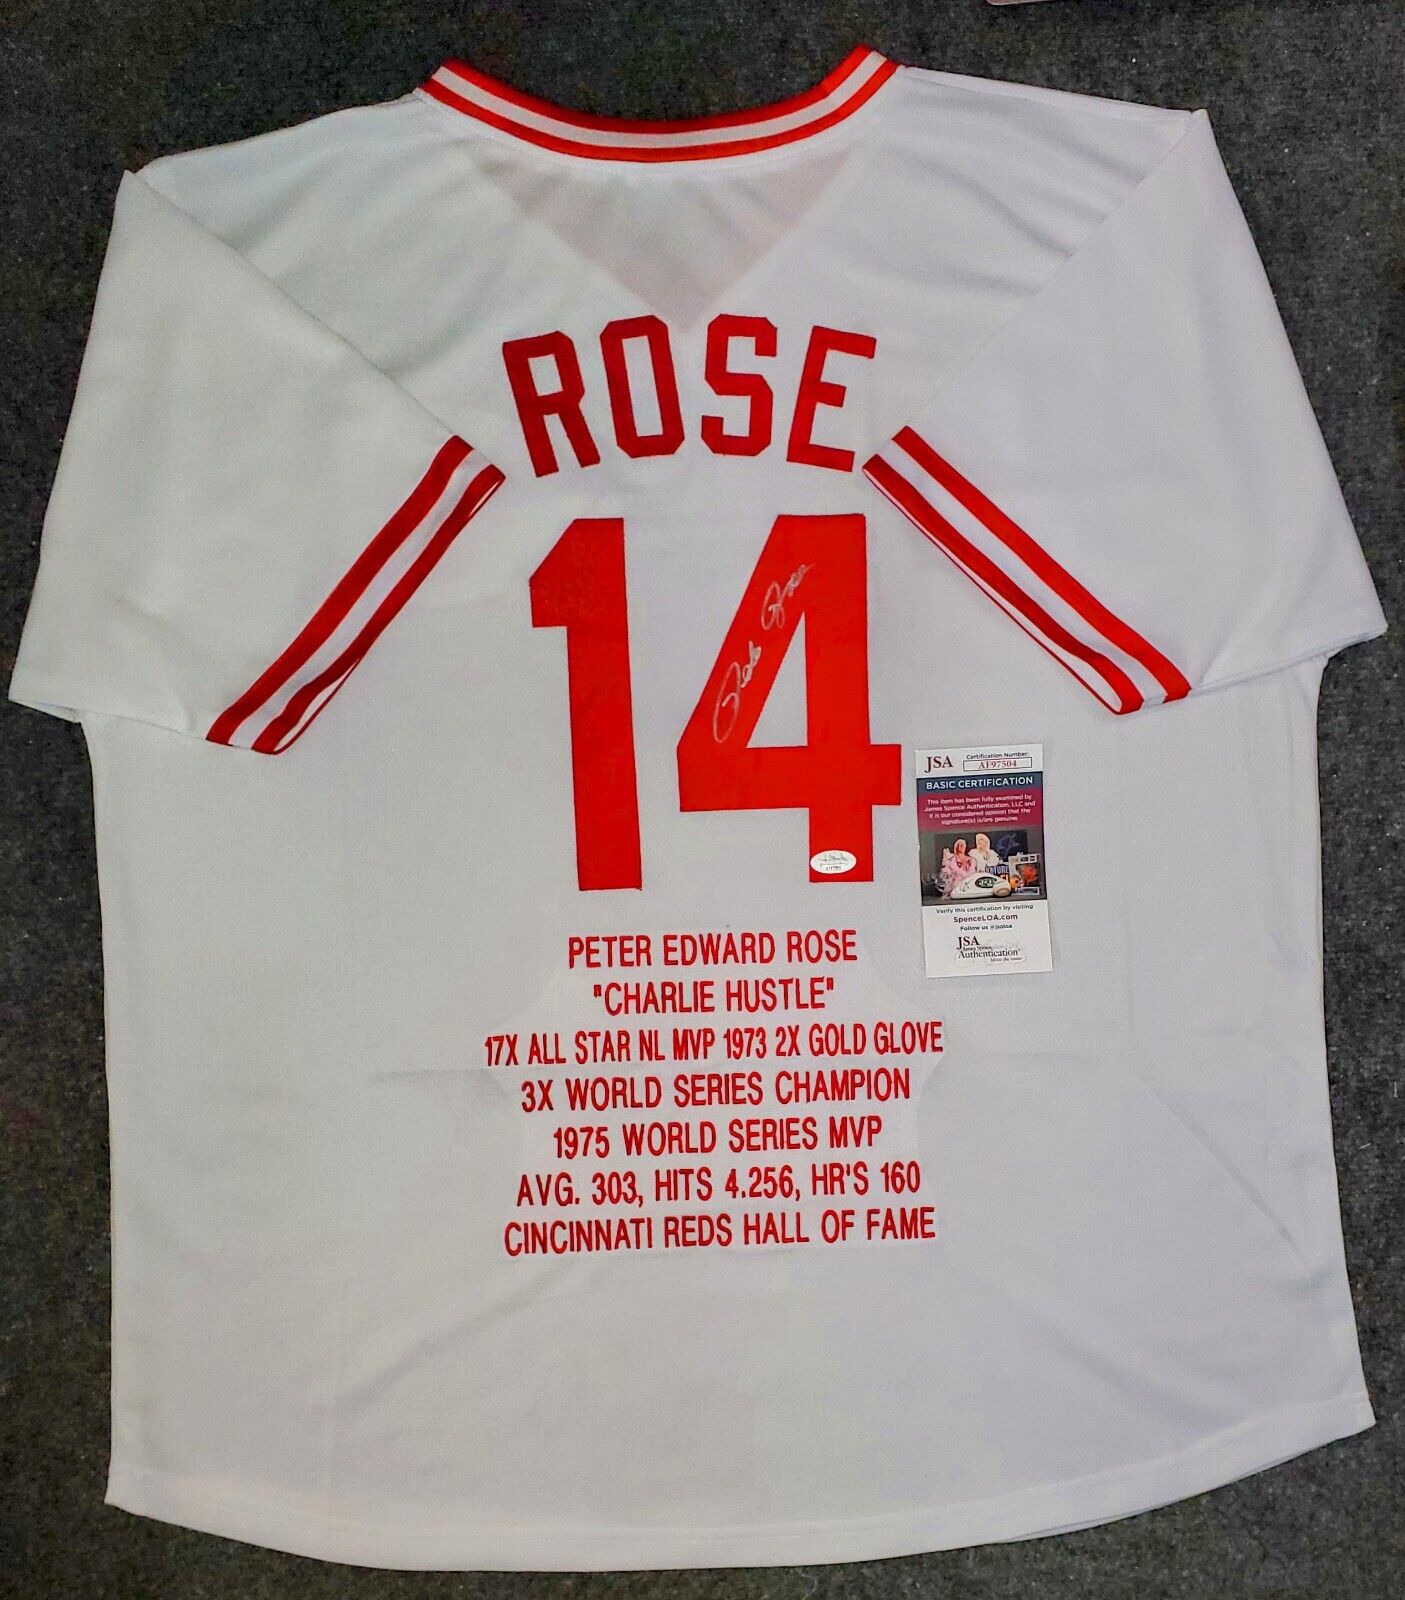 Autographed and Framed Pete Rose Jersey